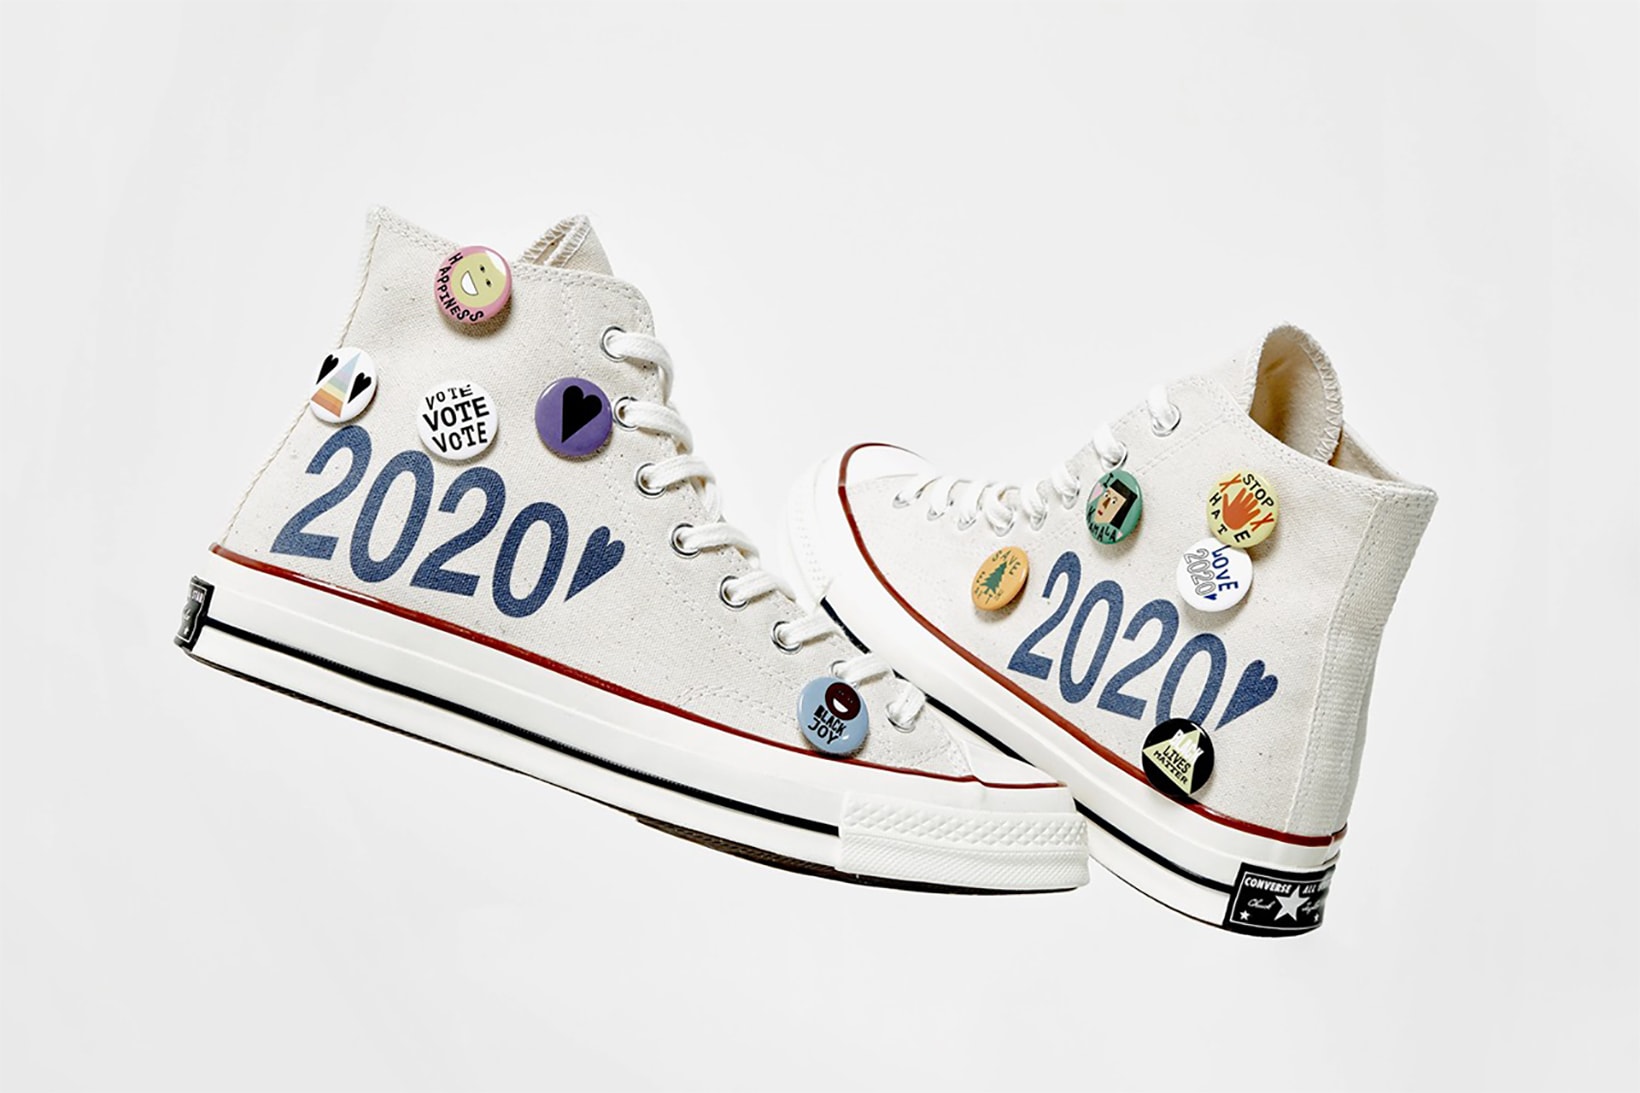 converse social status nina chanel collaboration chuck taylor all star sneakers us election vote donation